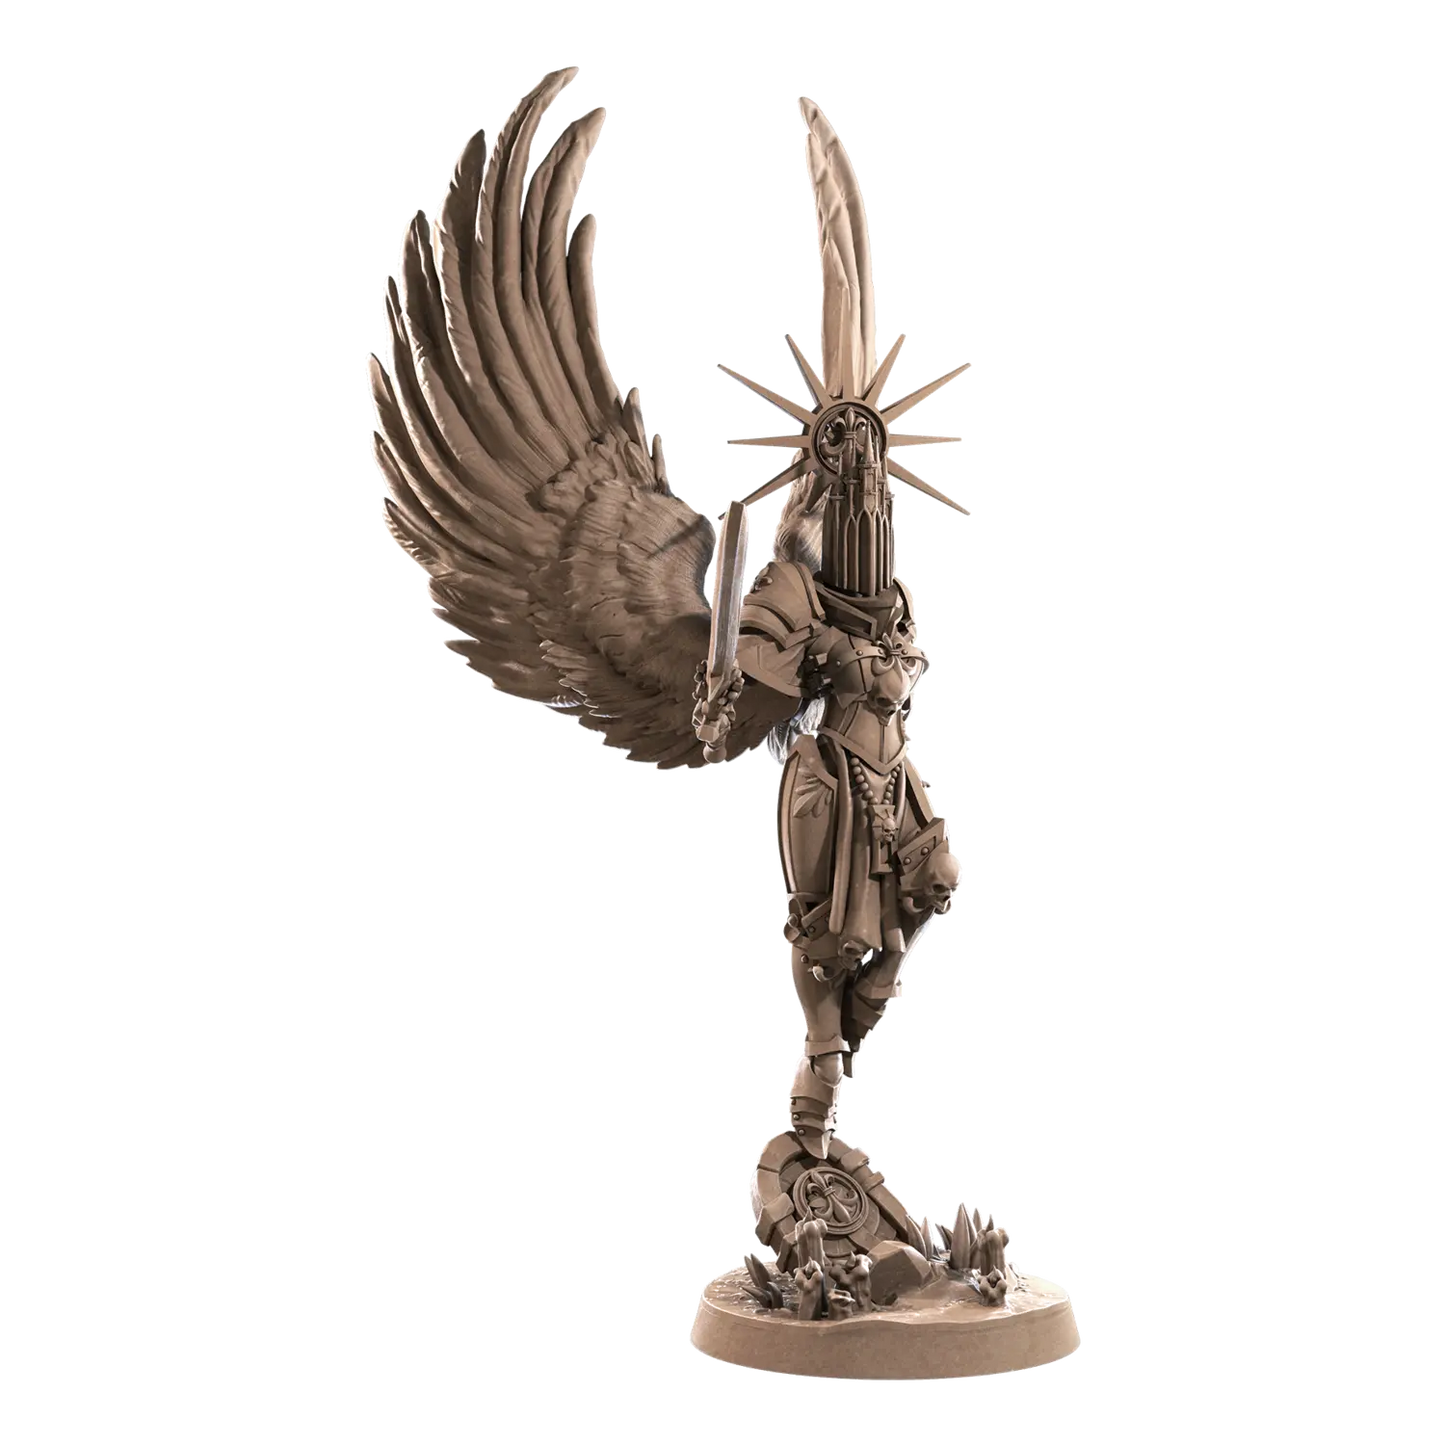 DnD Angel - Battle Sisters - Fighter - Human - Miniature - Paladin Evangeline 03 Angel - Battle Sisters - Fighter - Human - Miniature - Paladin sold by DoubleHitShop